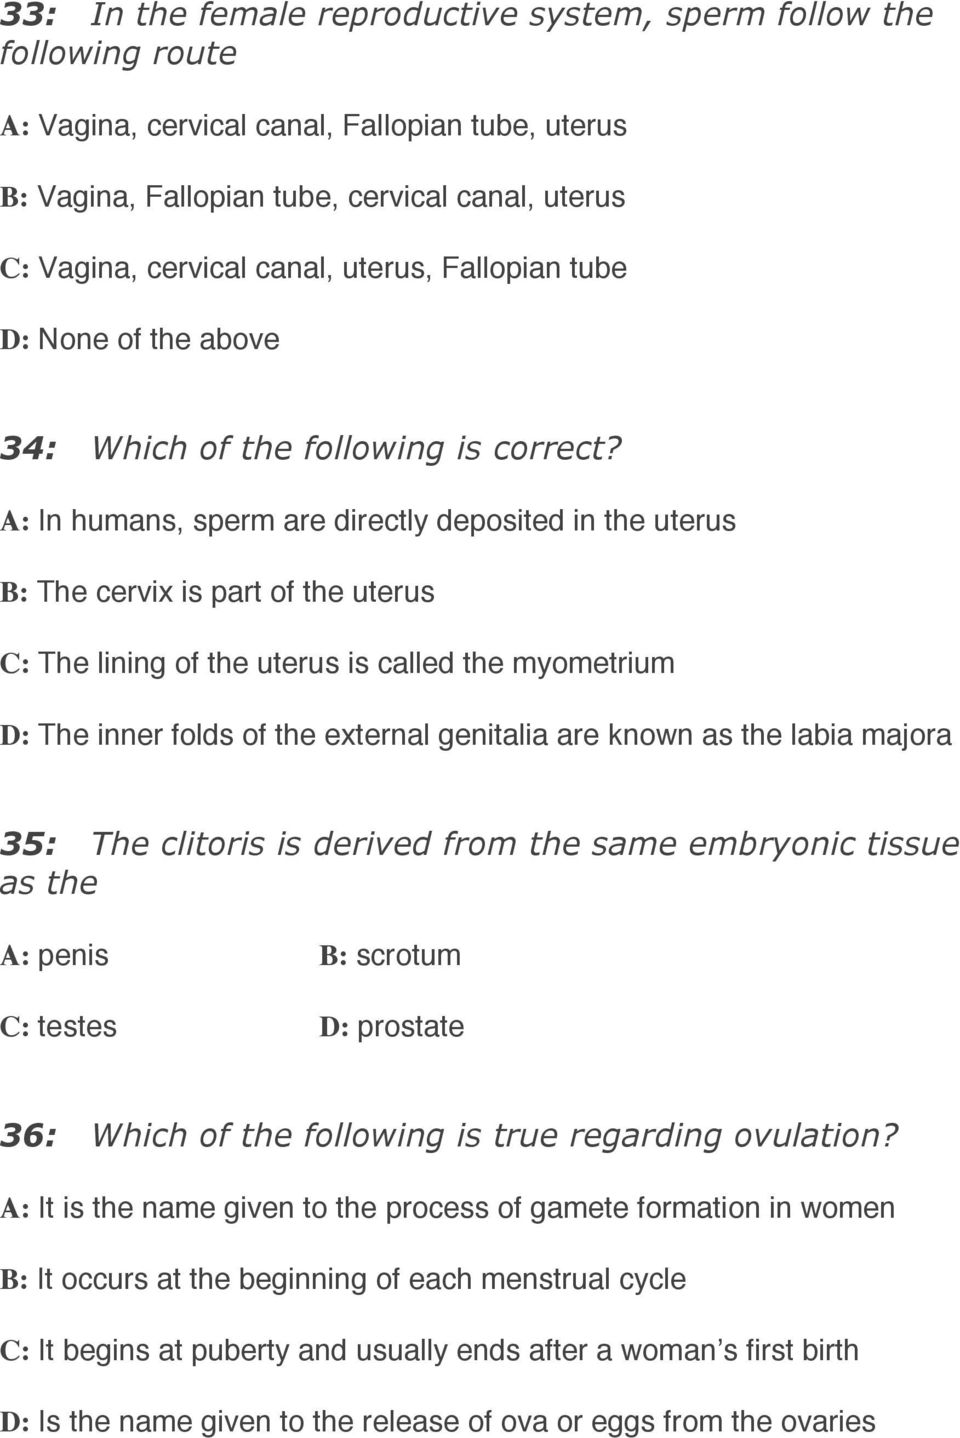 A: In humans, sperm are directly deposited in the uterus B: The cervix is part of the uterus C: The lining of the uterus is called the myometrium D: The inner folds of the external genitalia are